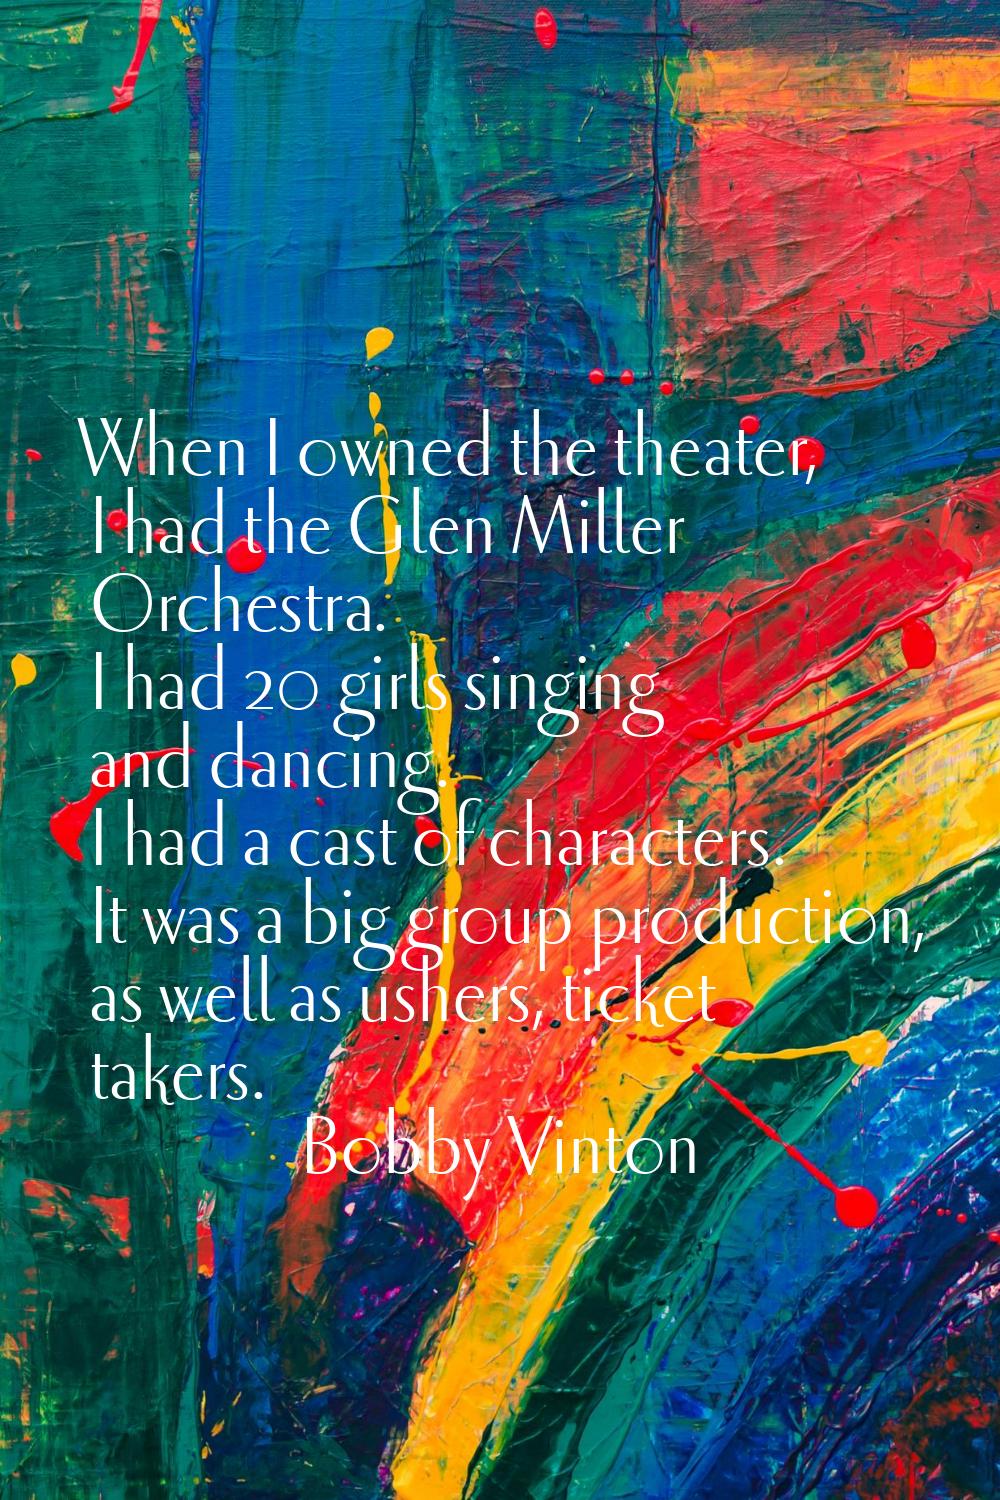 When I owned the theater, I had the Glen Miller Orchestra. I had 20 girls singing and dancing. I ha